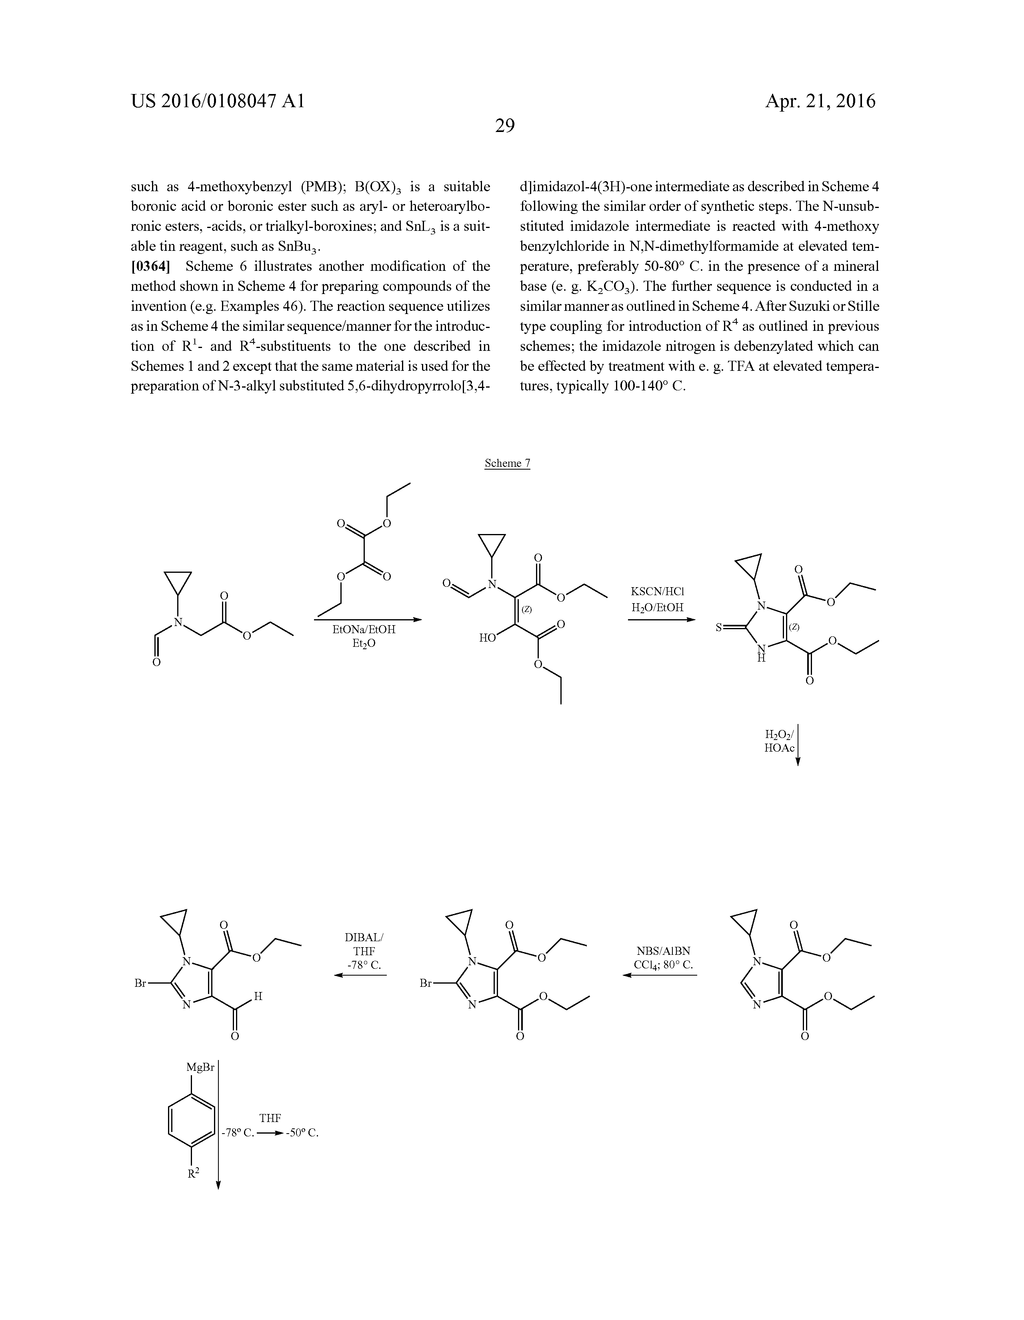 IMIDAZOPYRROLIDINE DERIVATIVES AND THEIR USE IN THE TREATMENT OF DISEASE - diagram, schematic, and image 30